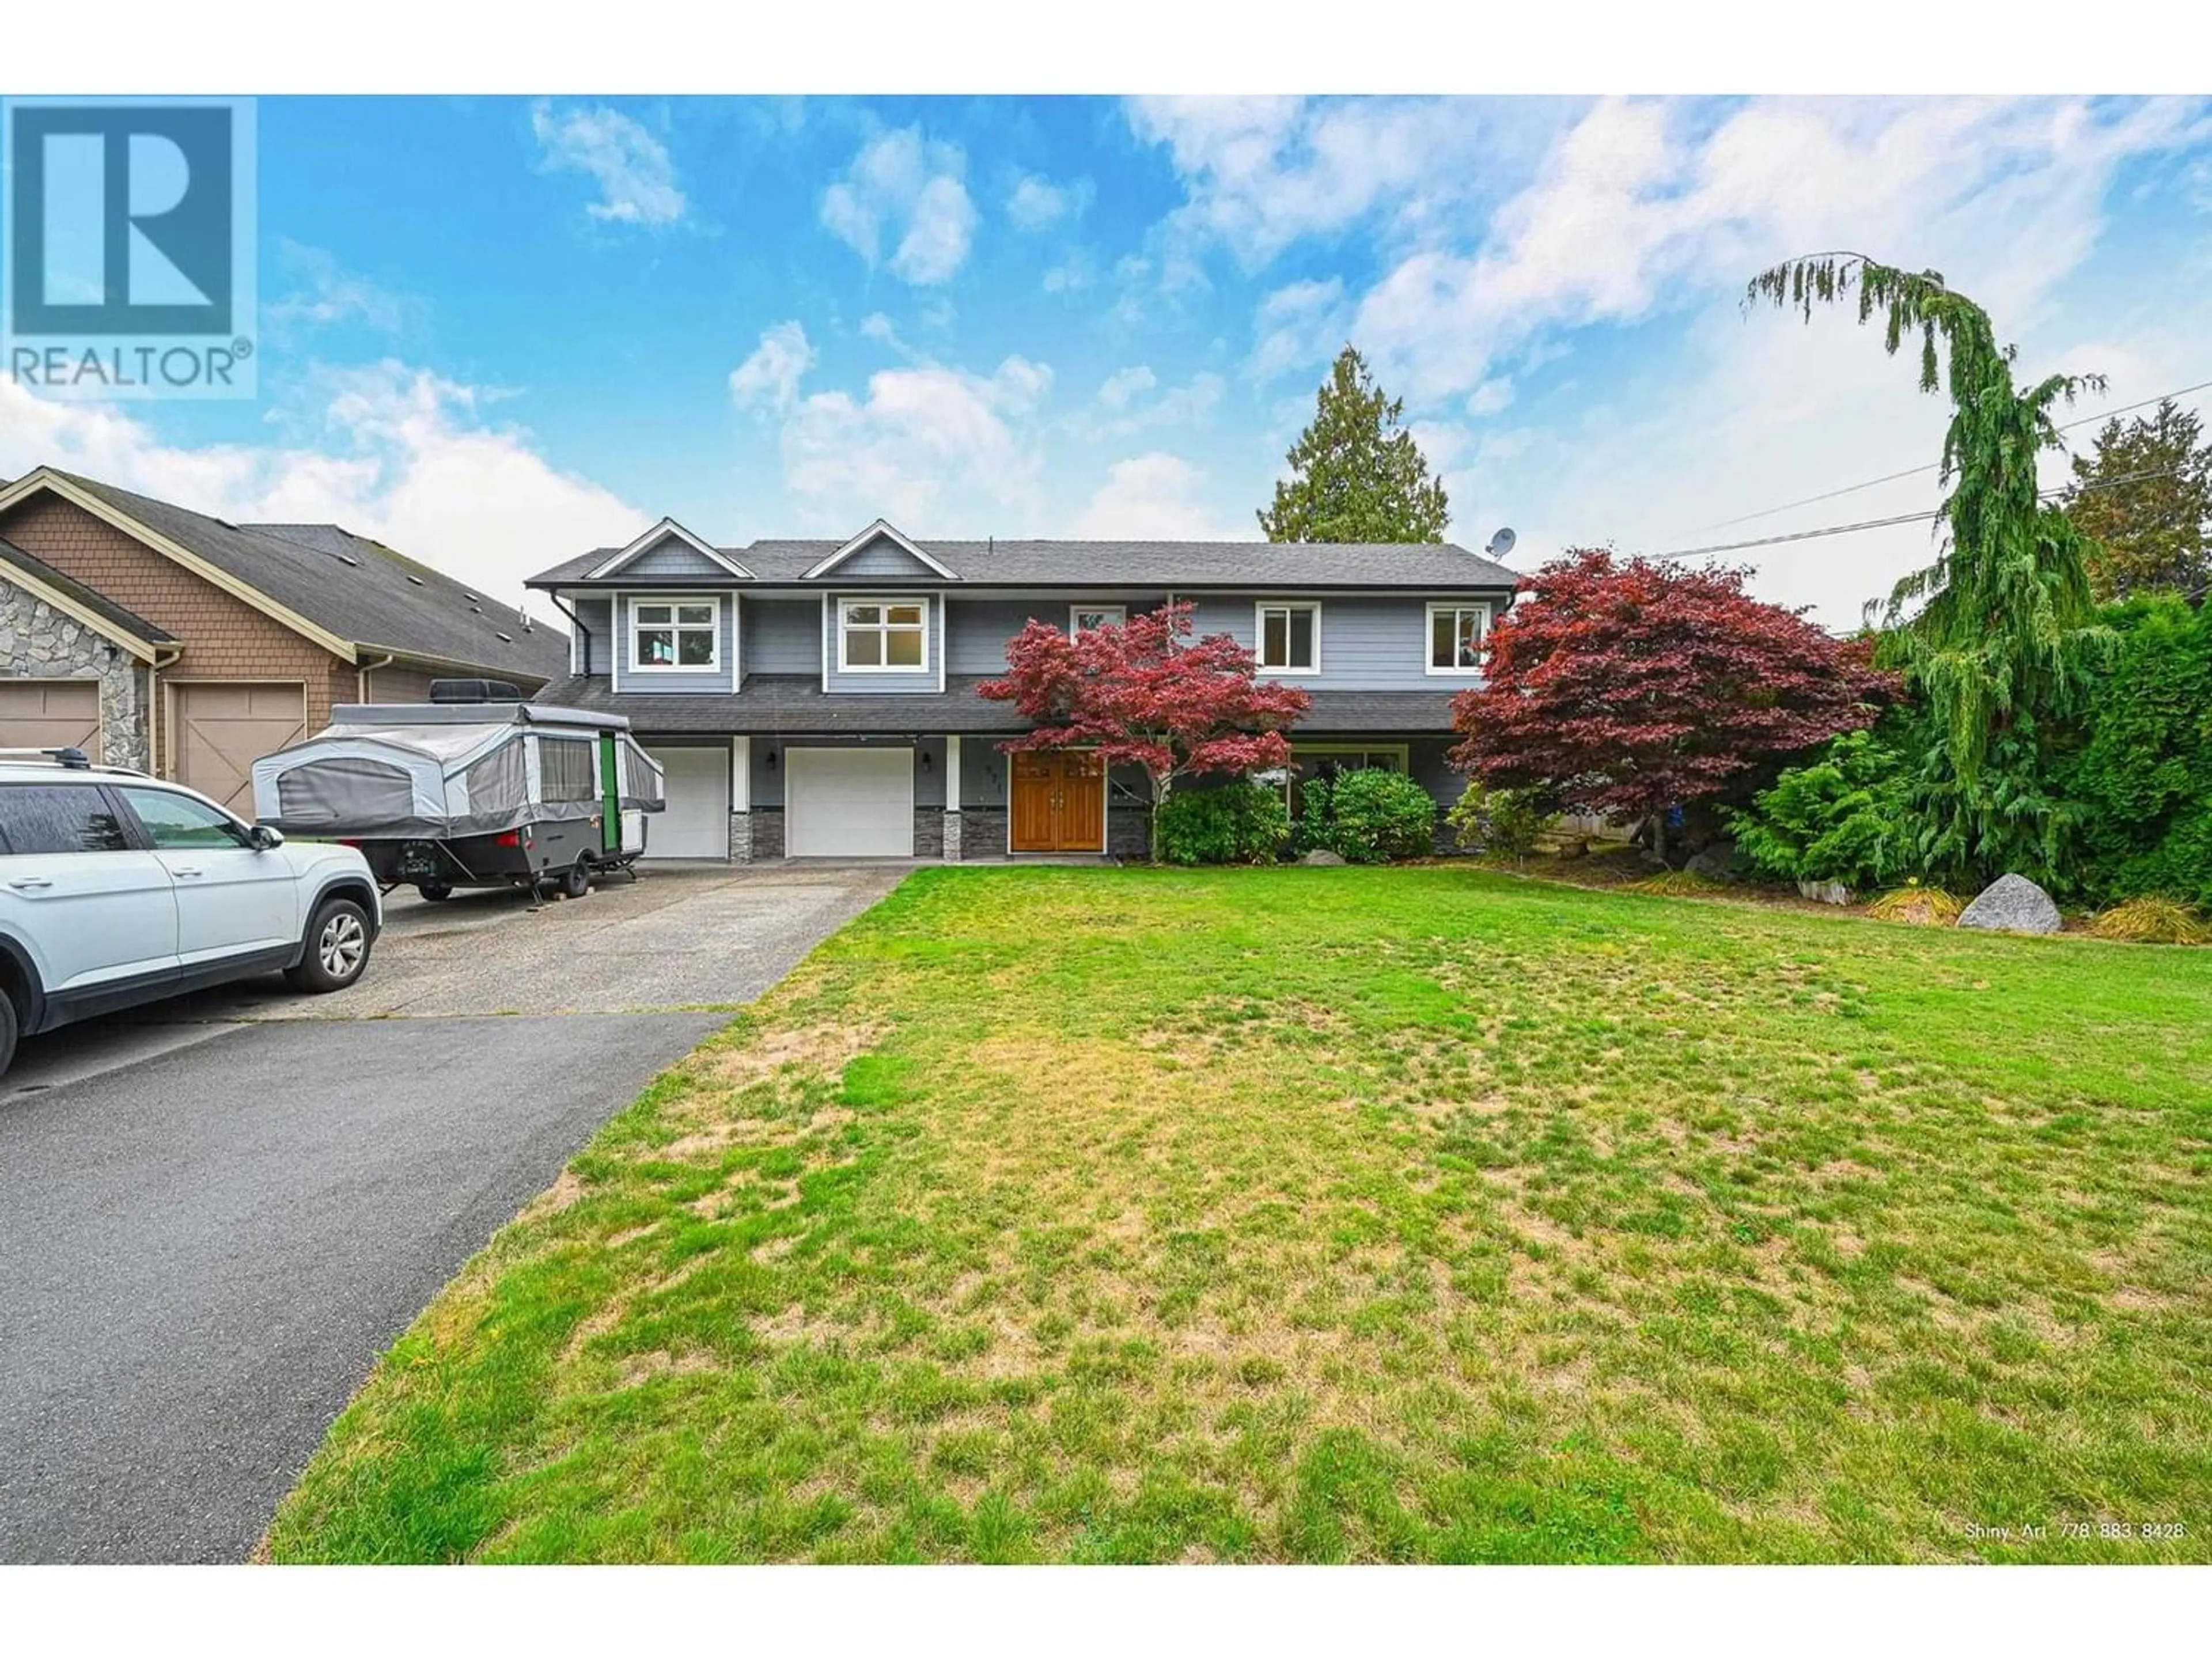 Frontside or backside of a home for 971 51A STREET, Delta British Columbia V4M2X9